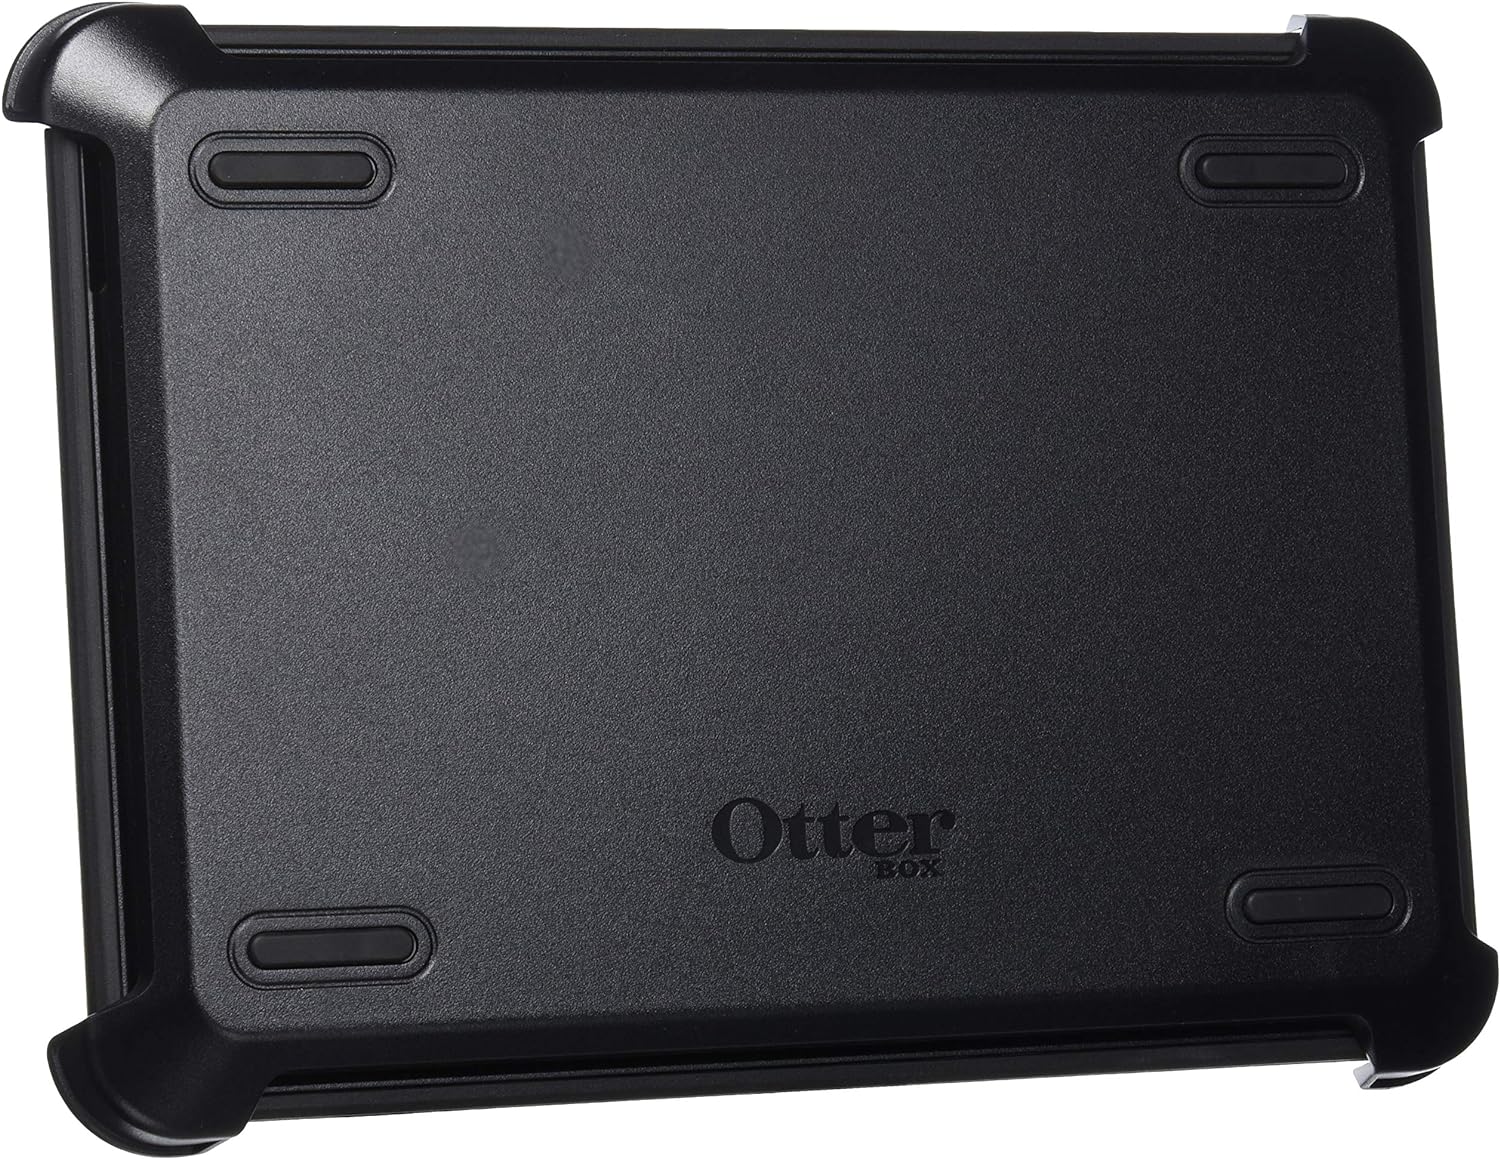 OtterBox DEFENDER SERIES Case for Microsoft Surface Go 2 - Black (New)